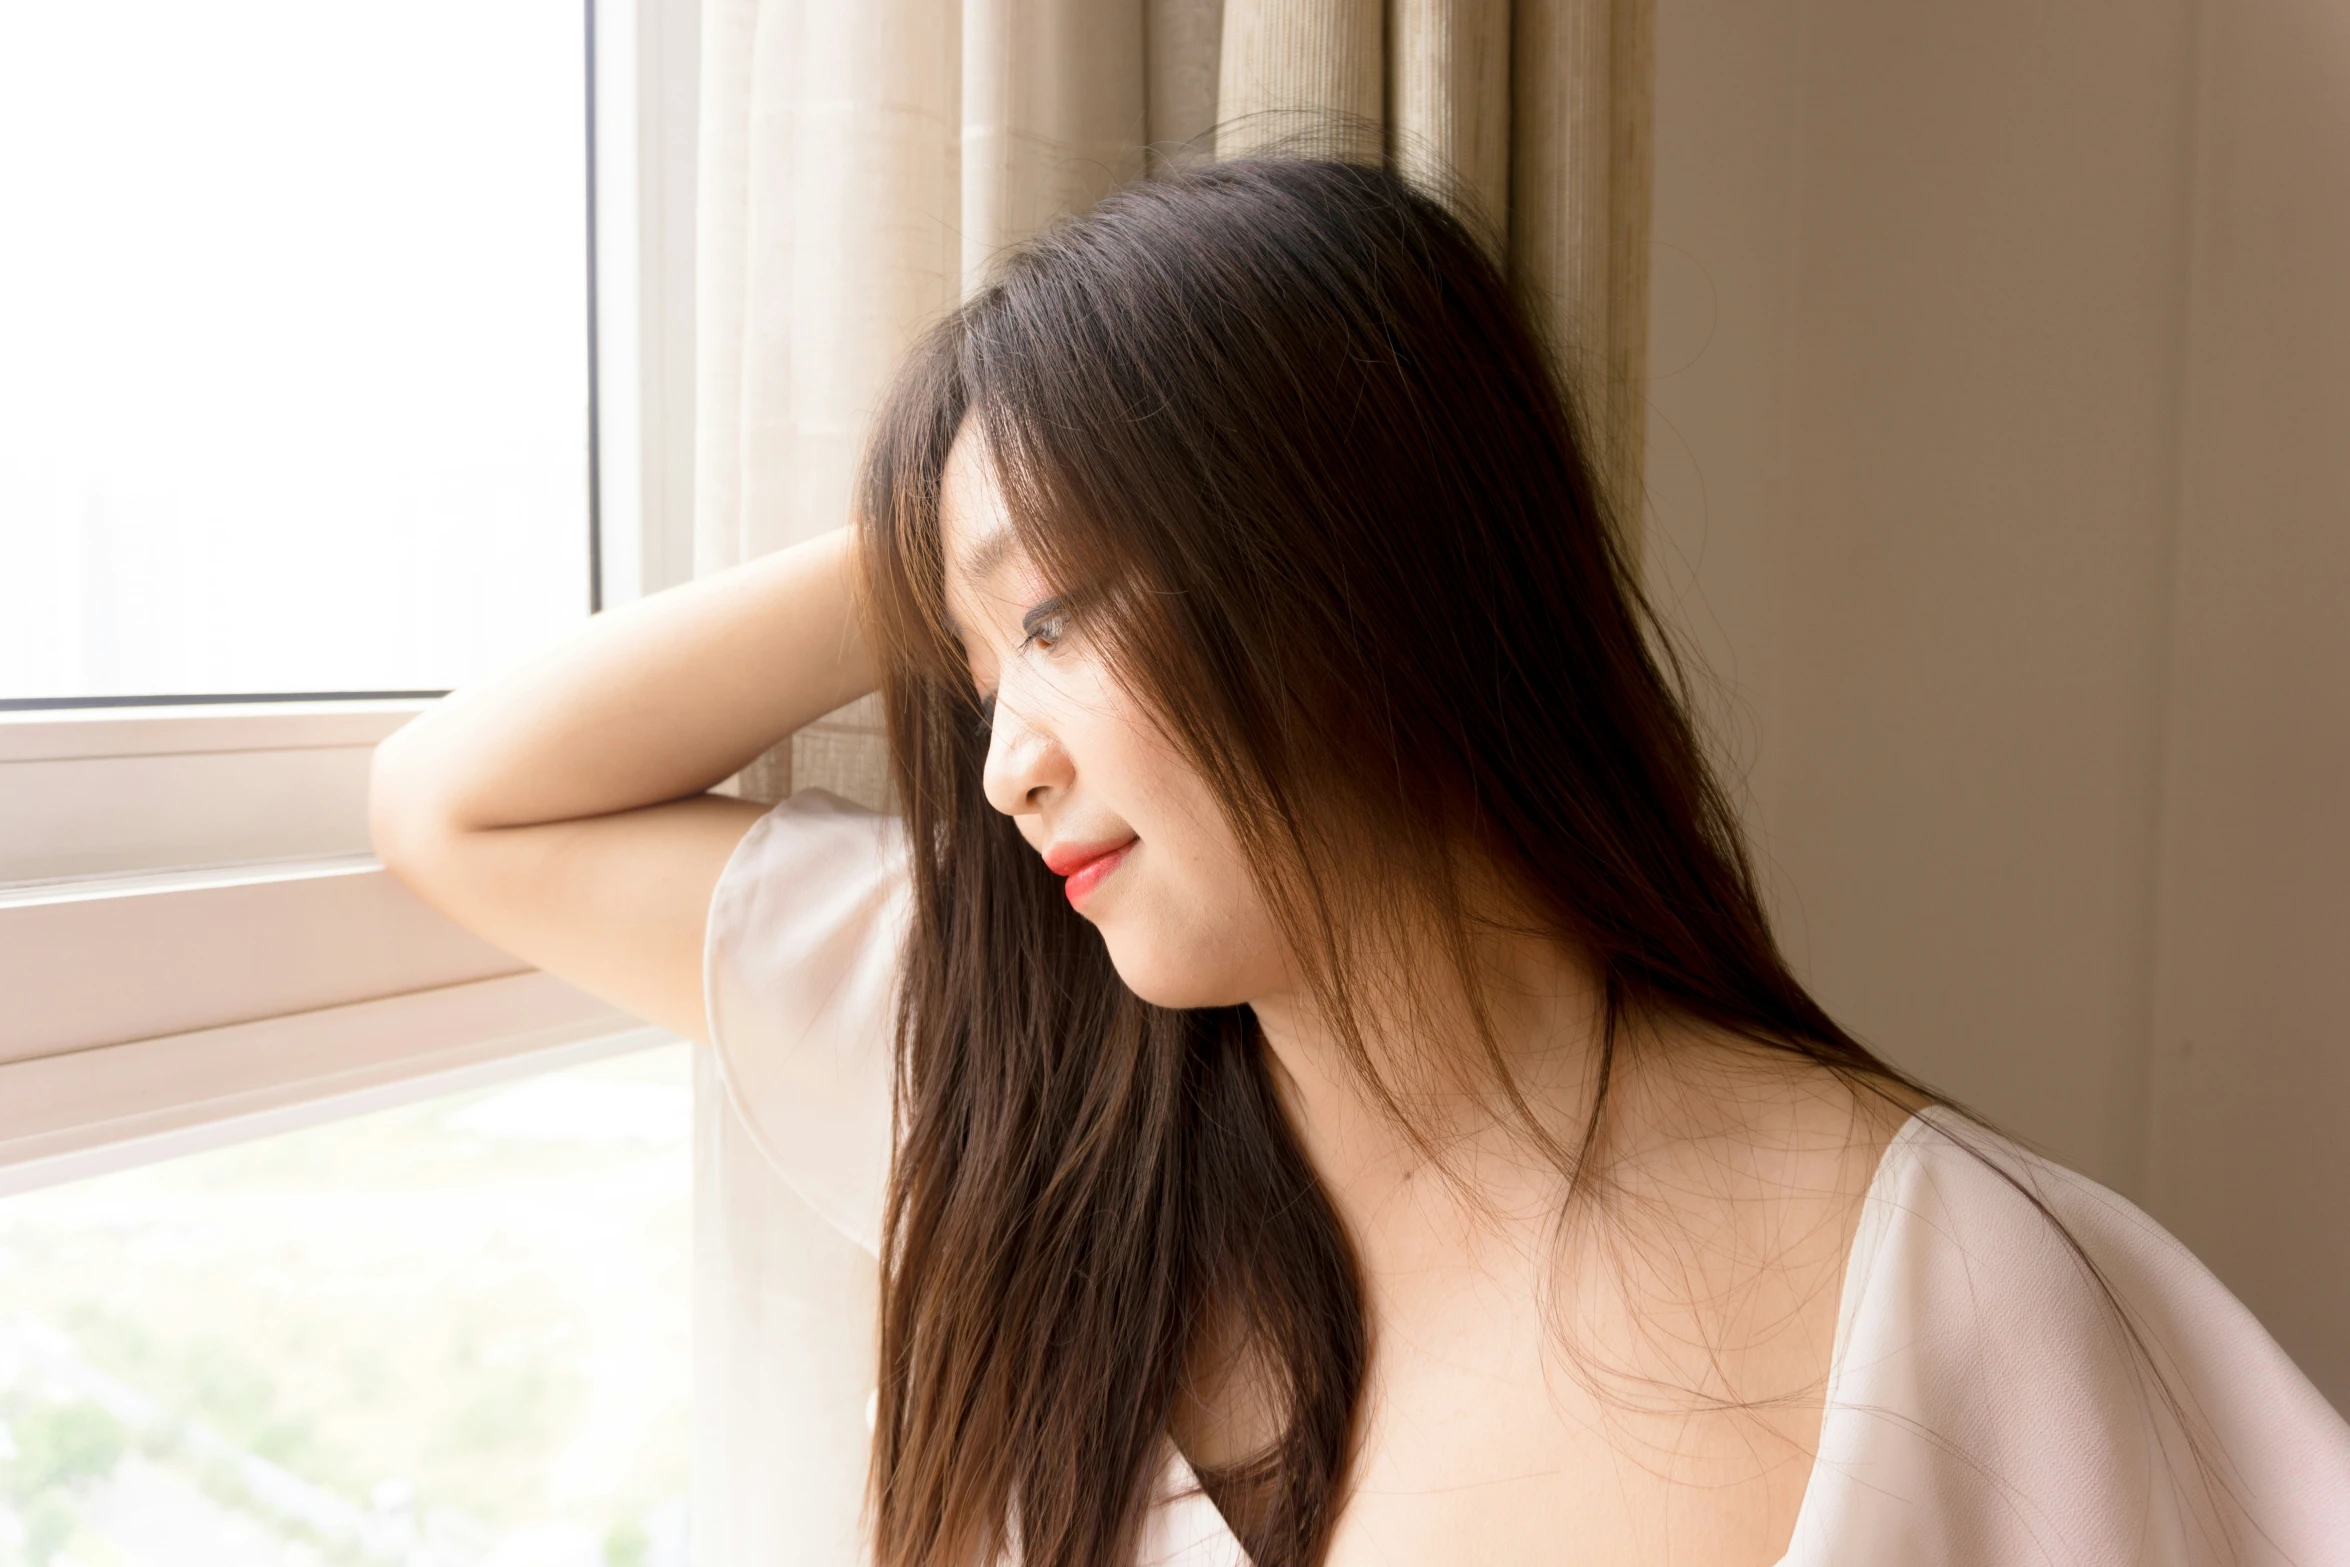 a woman is leaning against the window sill